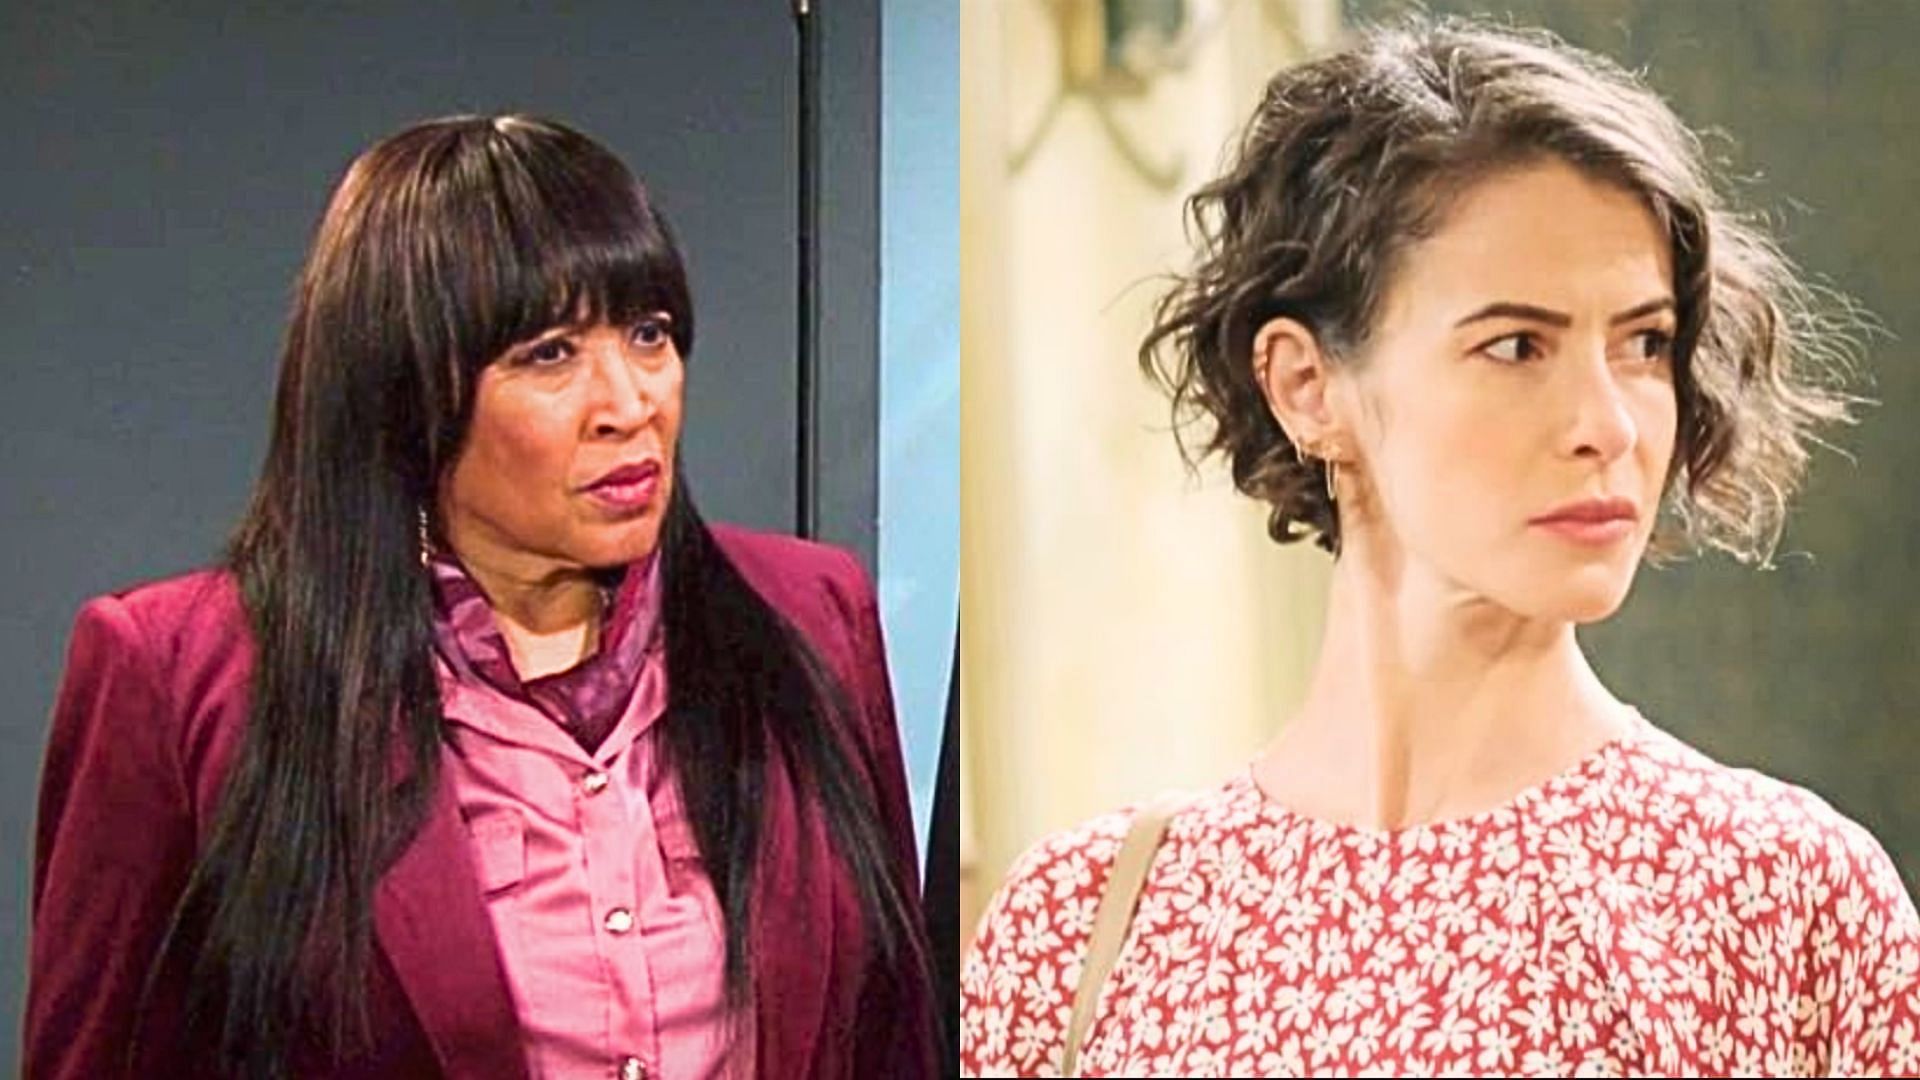 (L) Paulina and (R) Sarah are part of the heightening drama on Days of Our Lives this week (Images via ABC)